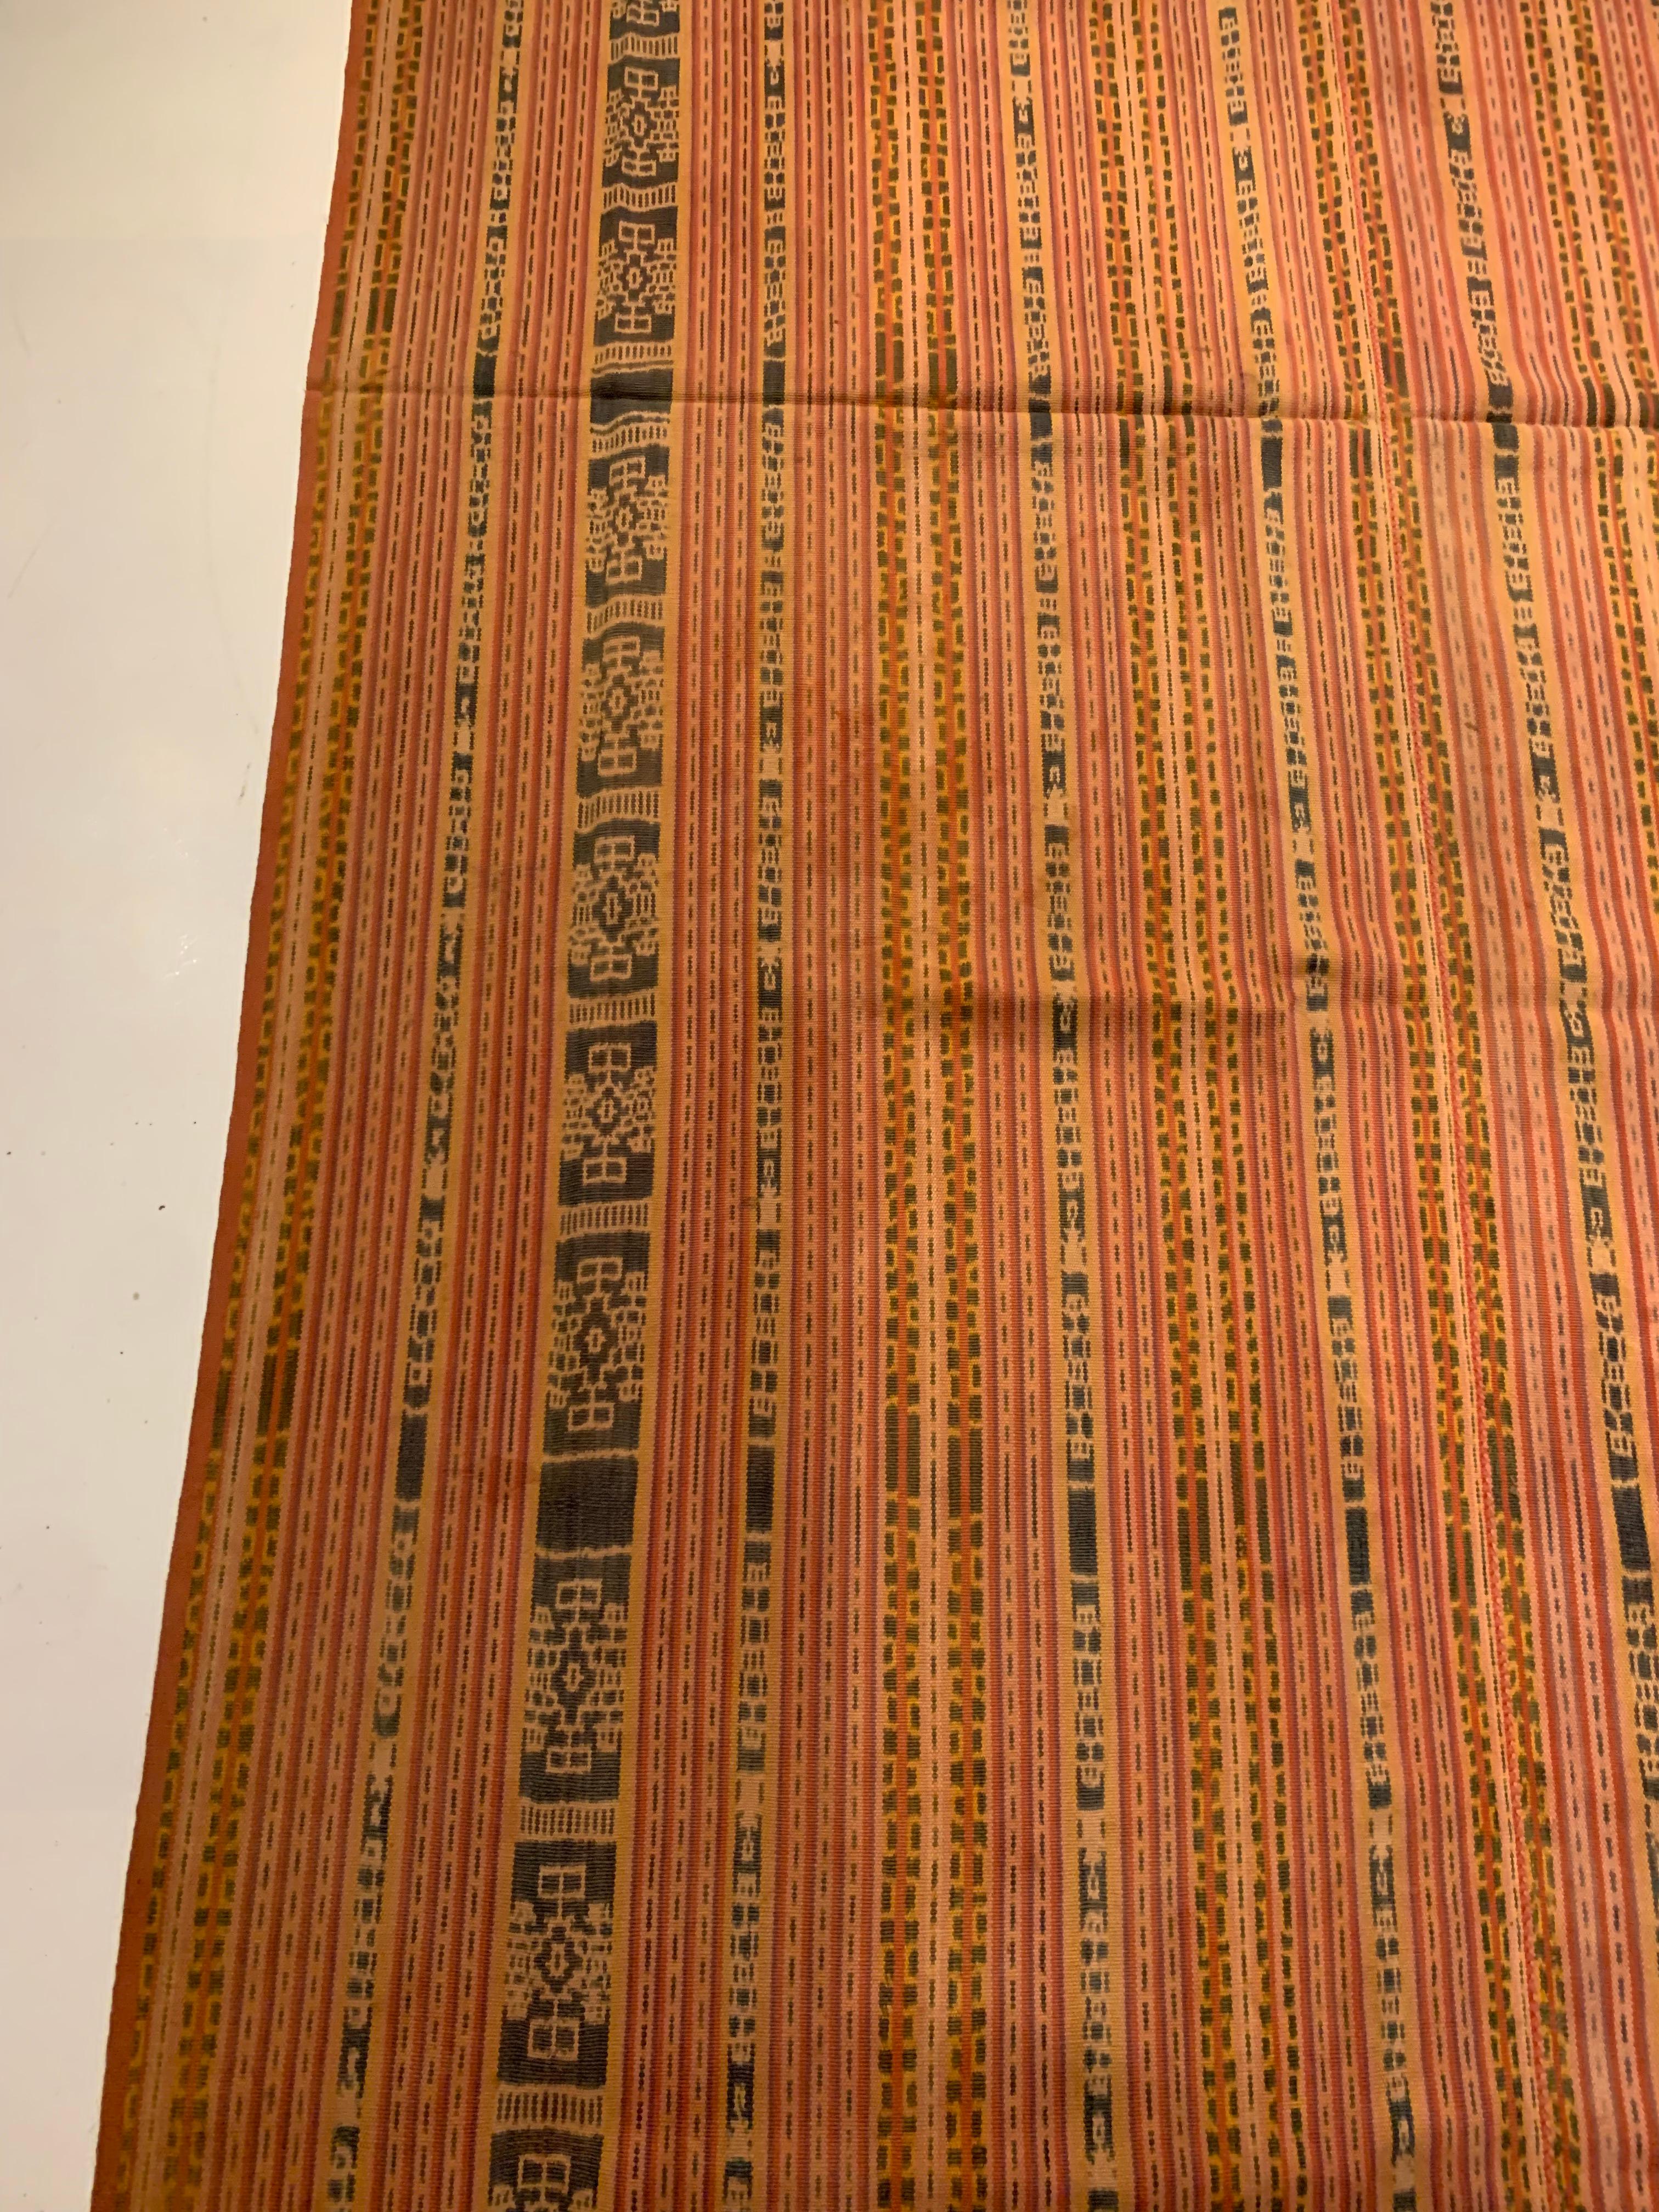 Yarn Rare Ikat Textile from Timor Stunning Tribal Motifs & Colors, Indonesia c. 1900 For Sale